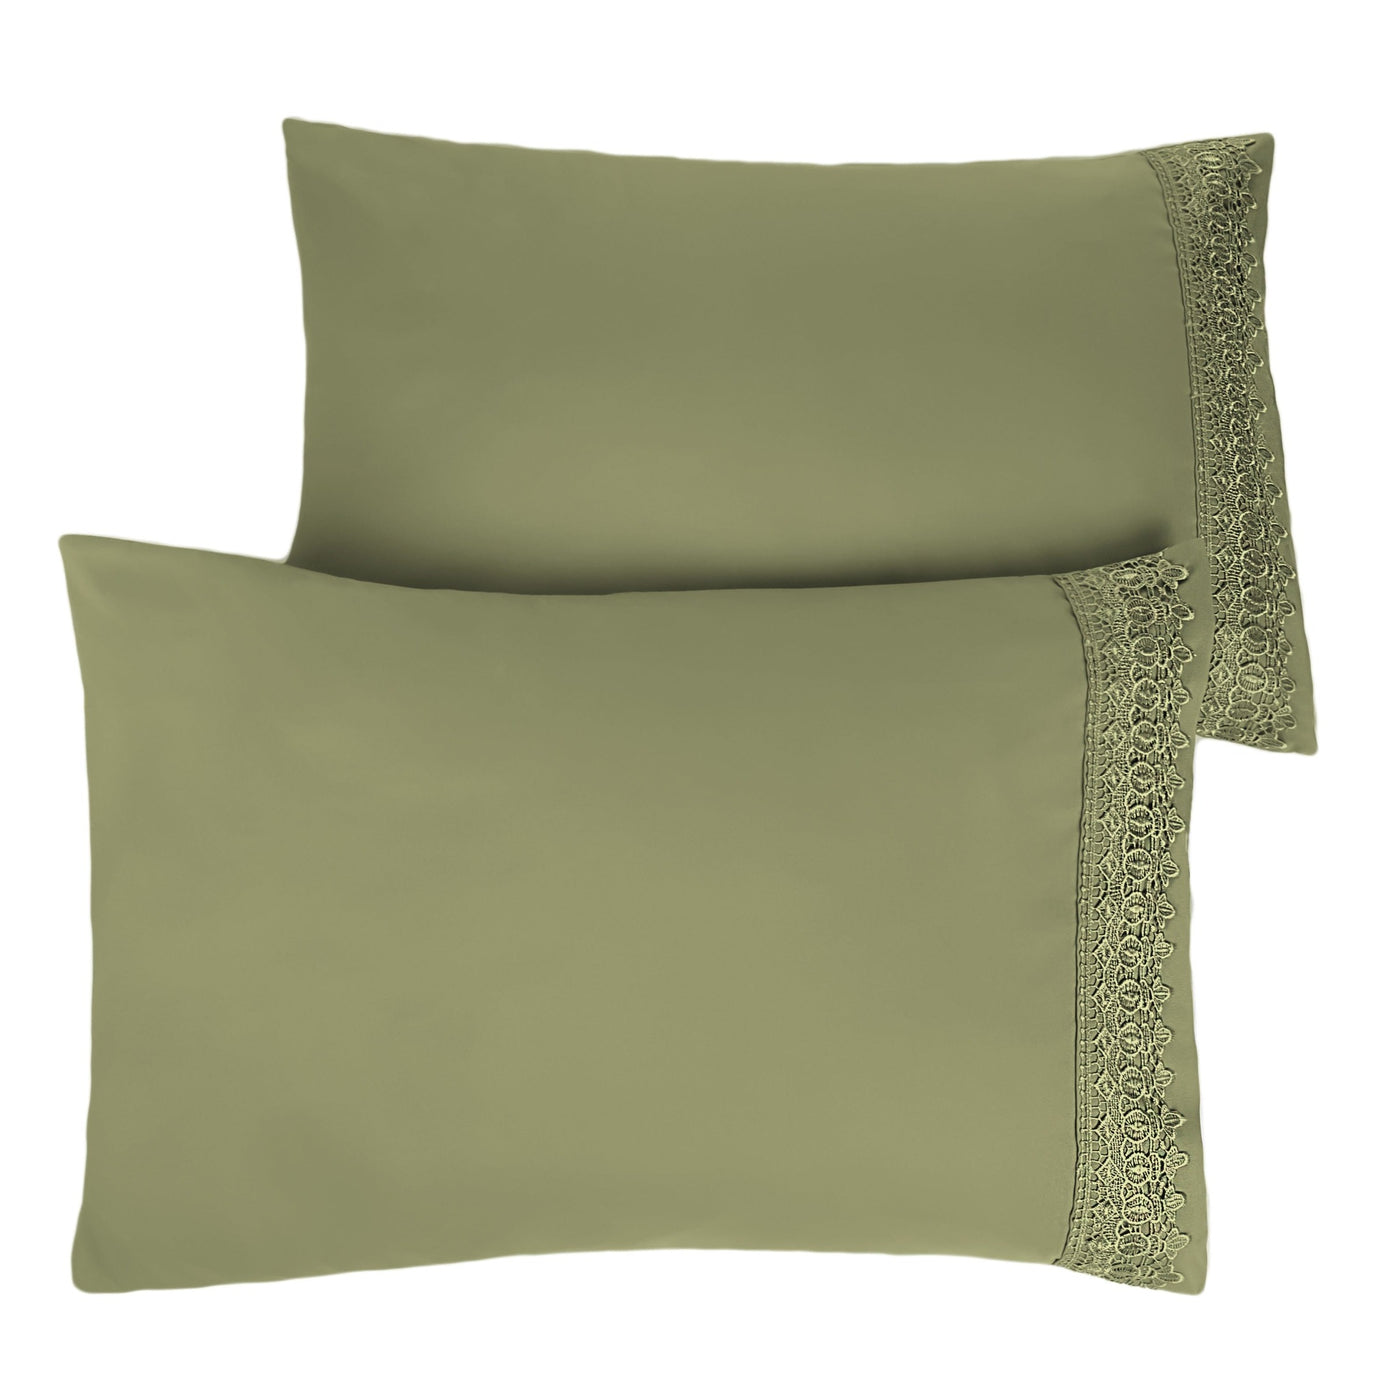 Two Vilano Lace Hem Pillow Cases in Sage Green Stack Together#color_vilano-sage-green